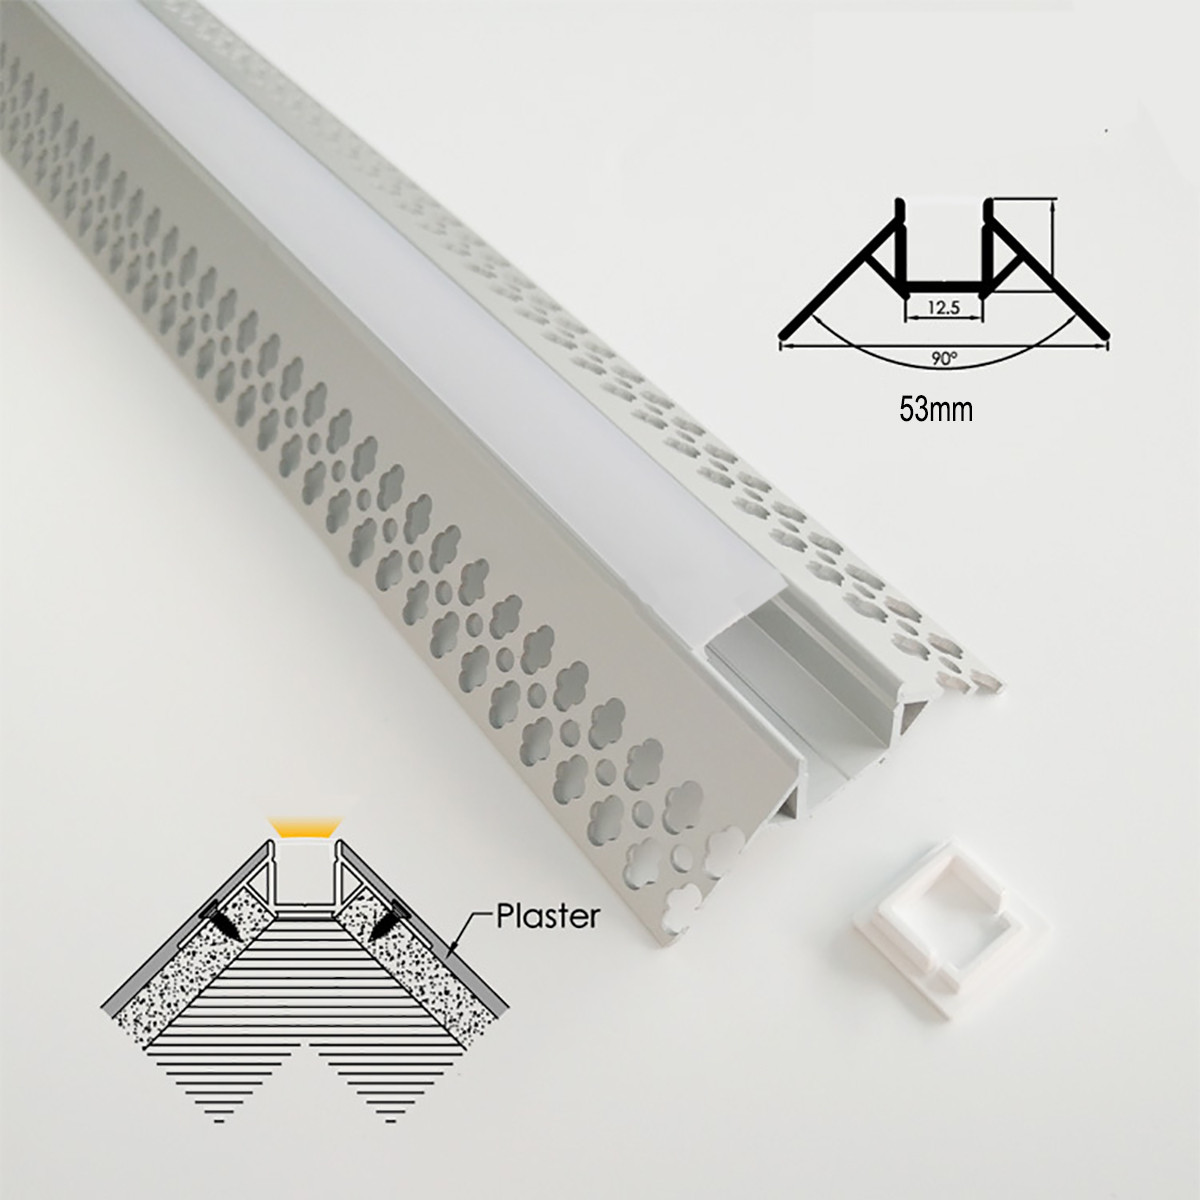 1m Recessed Led Aluminum Profile Channel Holder For Indoor Home